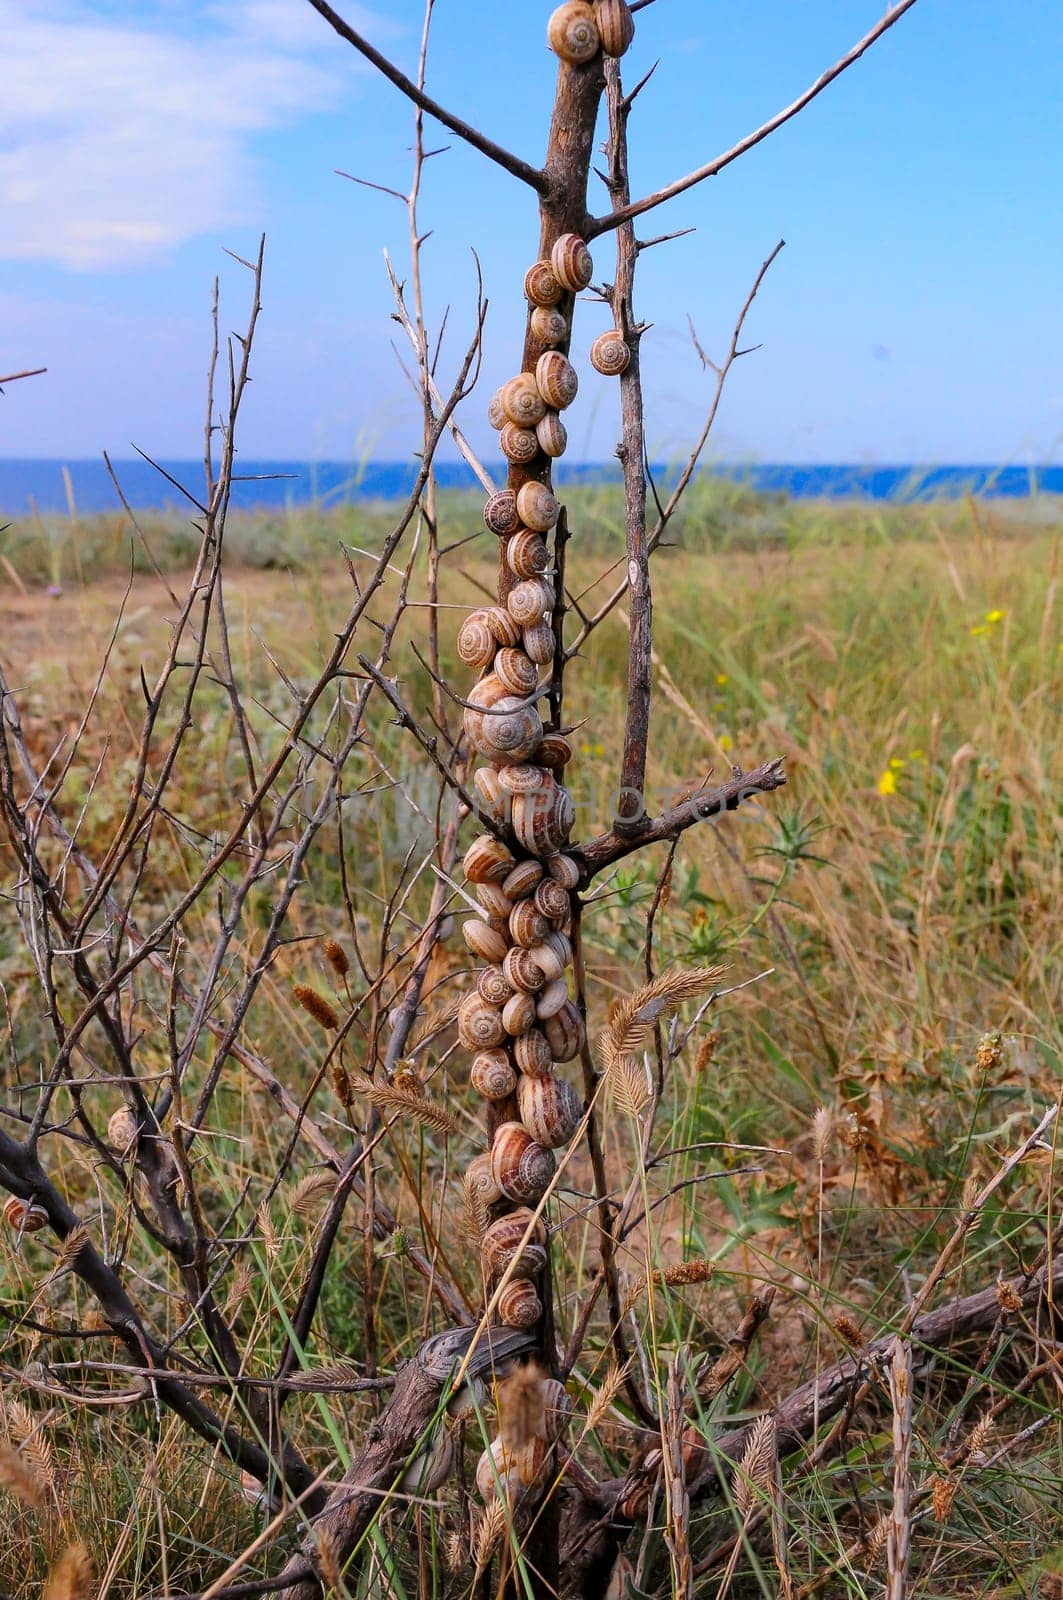 Eobania vermiculata (Helicidae),  accumulation of sleeping mollusks on the branches of plants in summer in the eastern Crimea